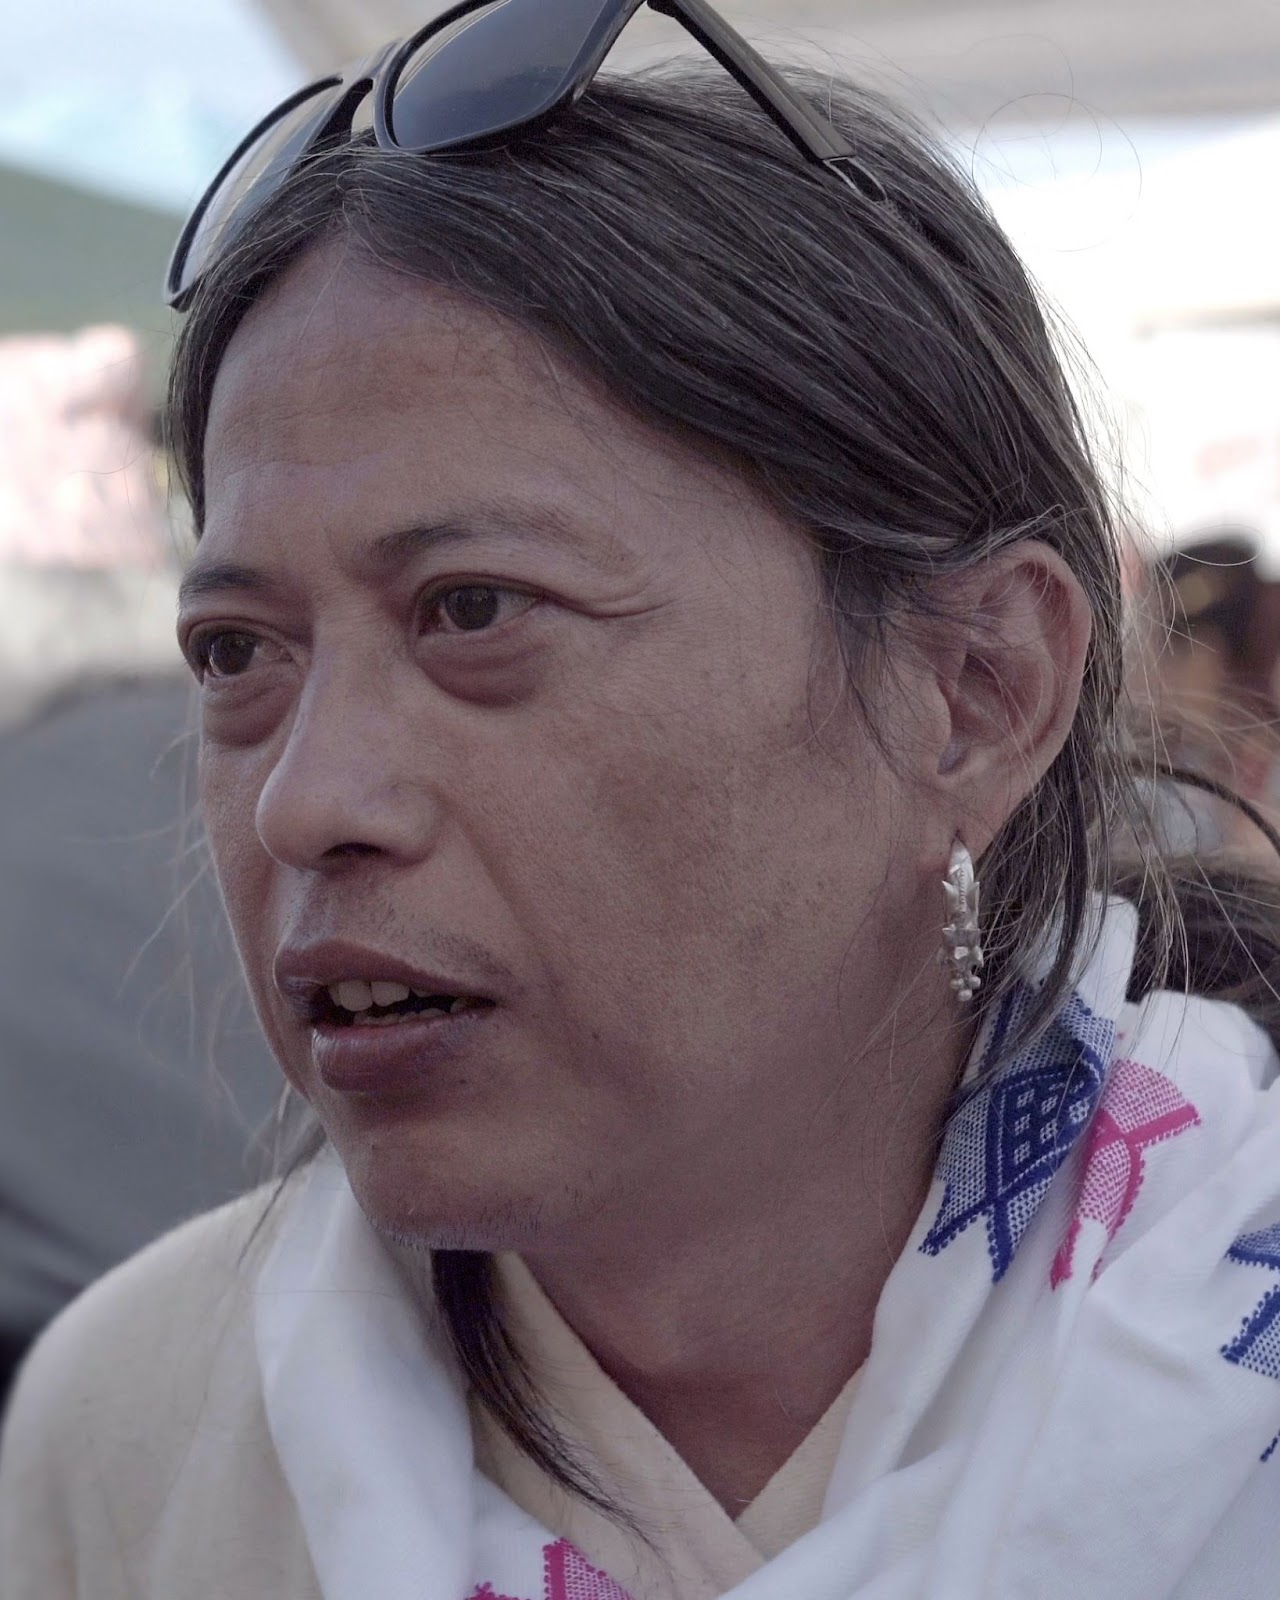 An indigenous Yakthung person with long hair, silver earrings, traditional white scarf with blue and pink star patterns.